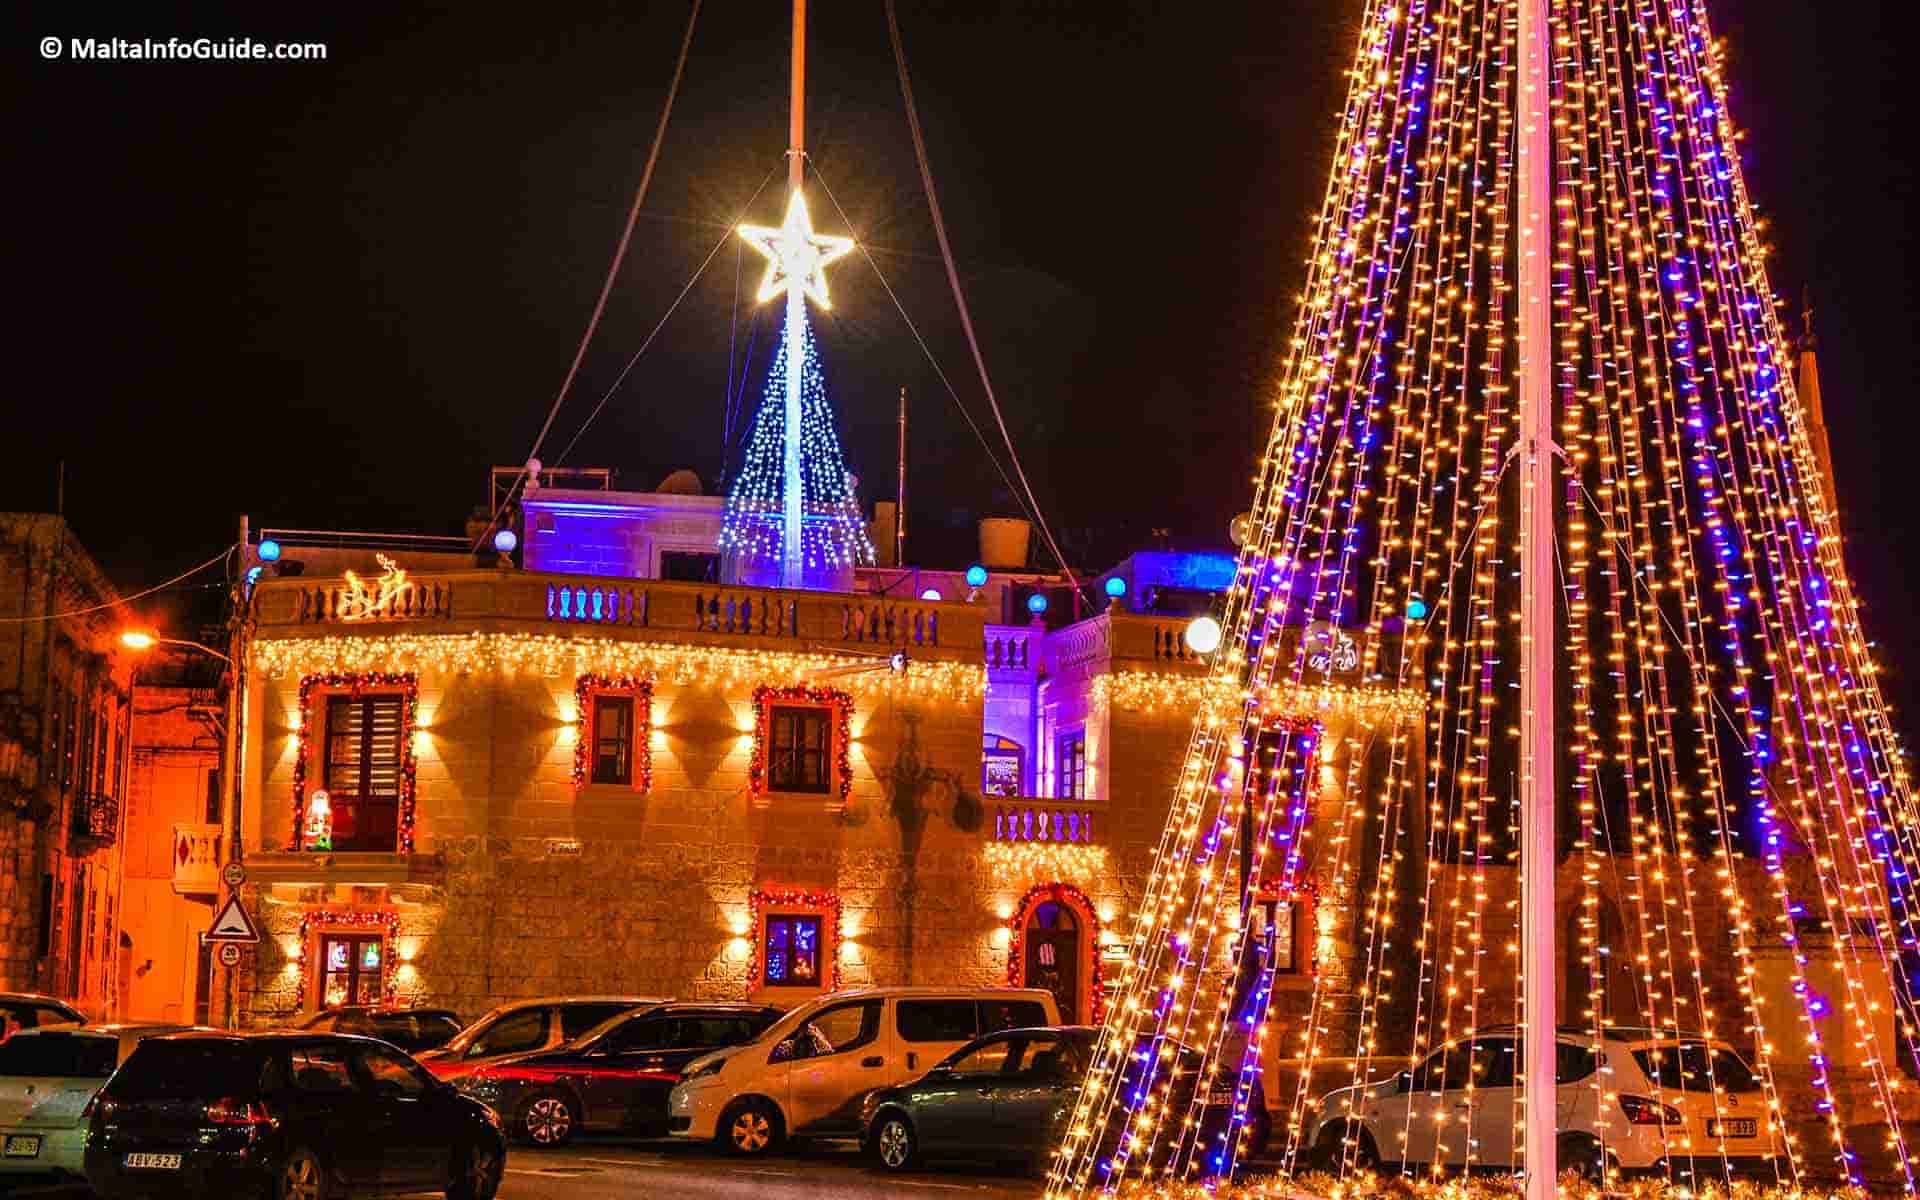 can you visit malta in december